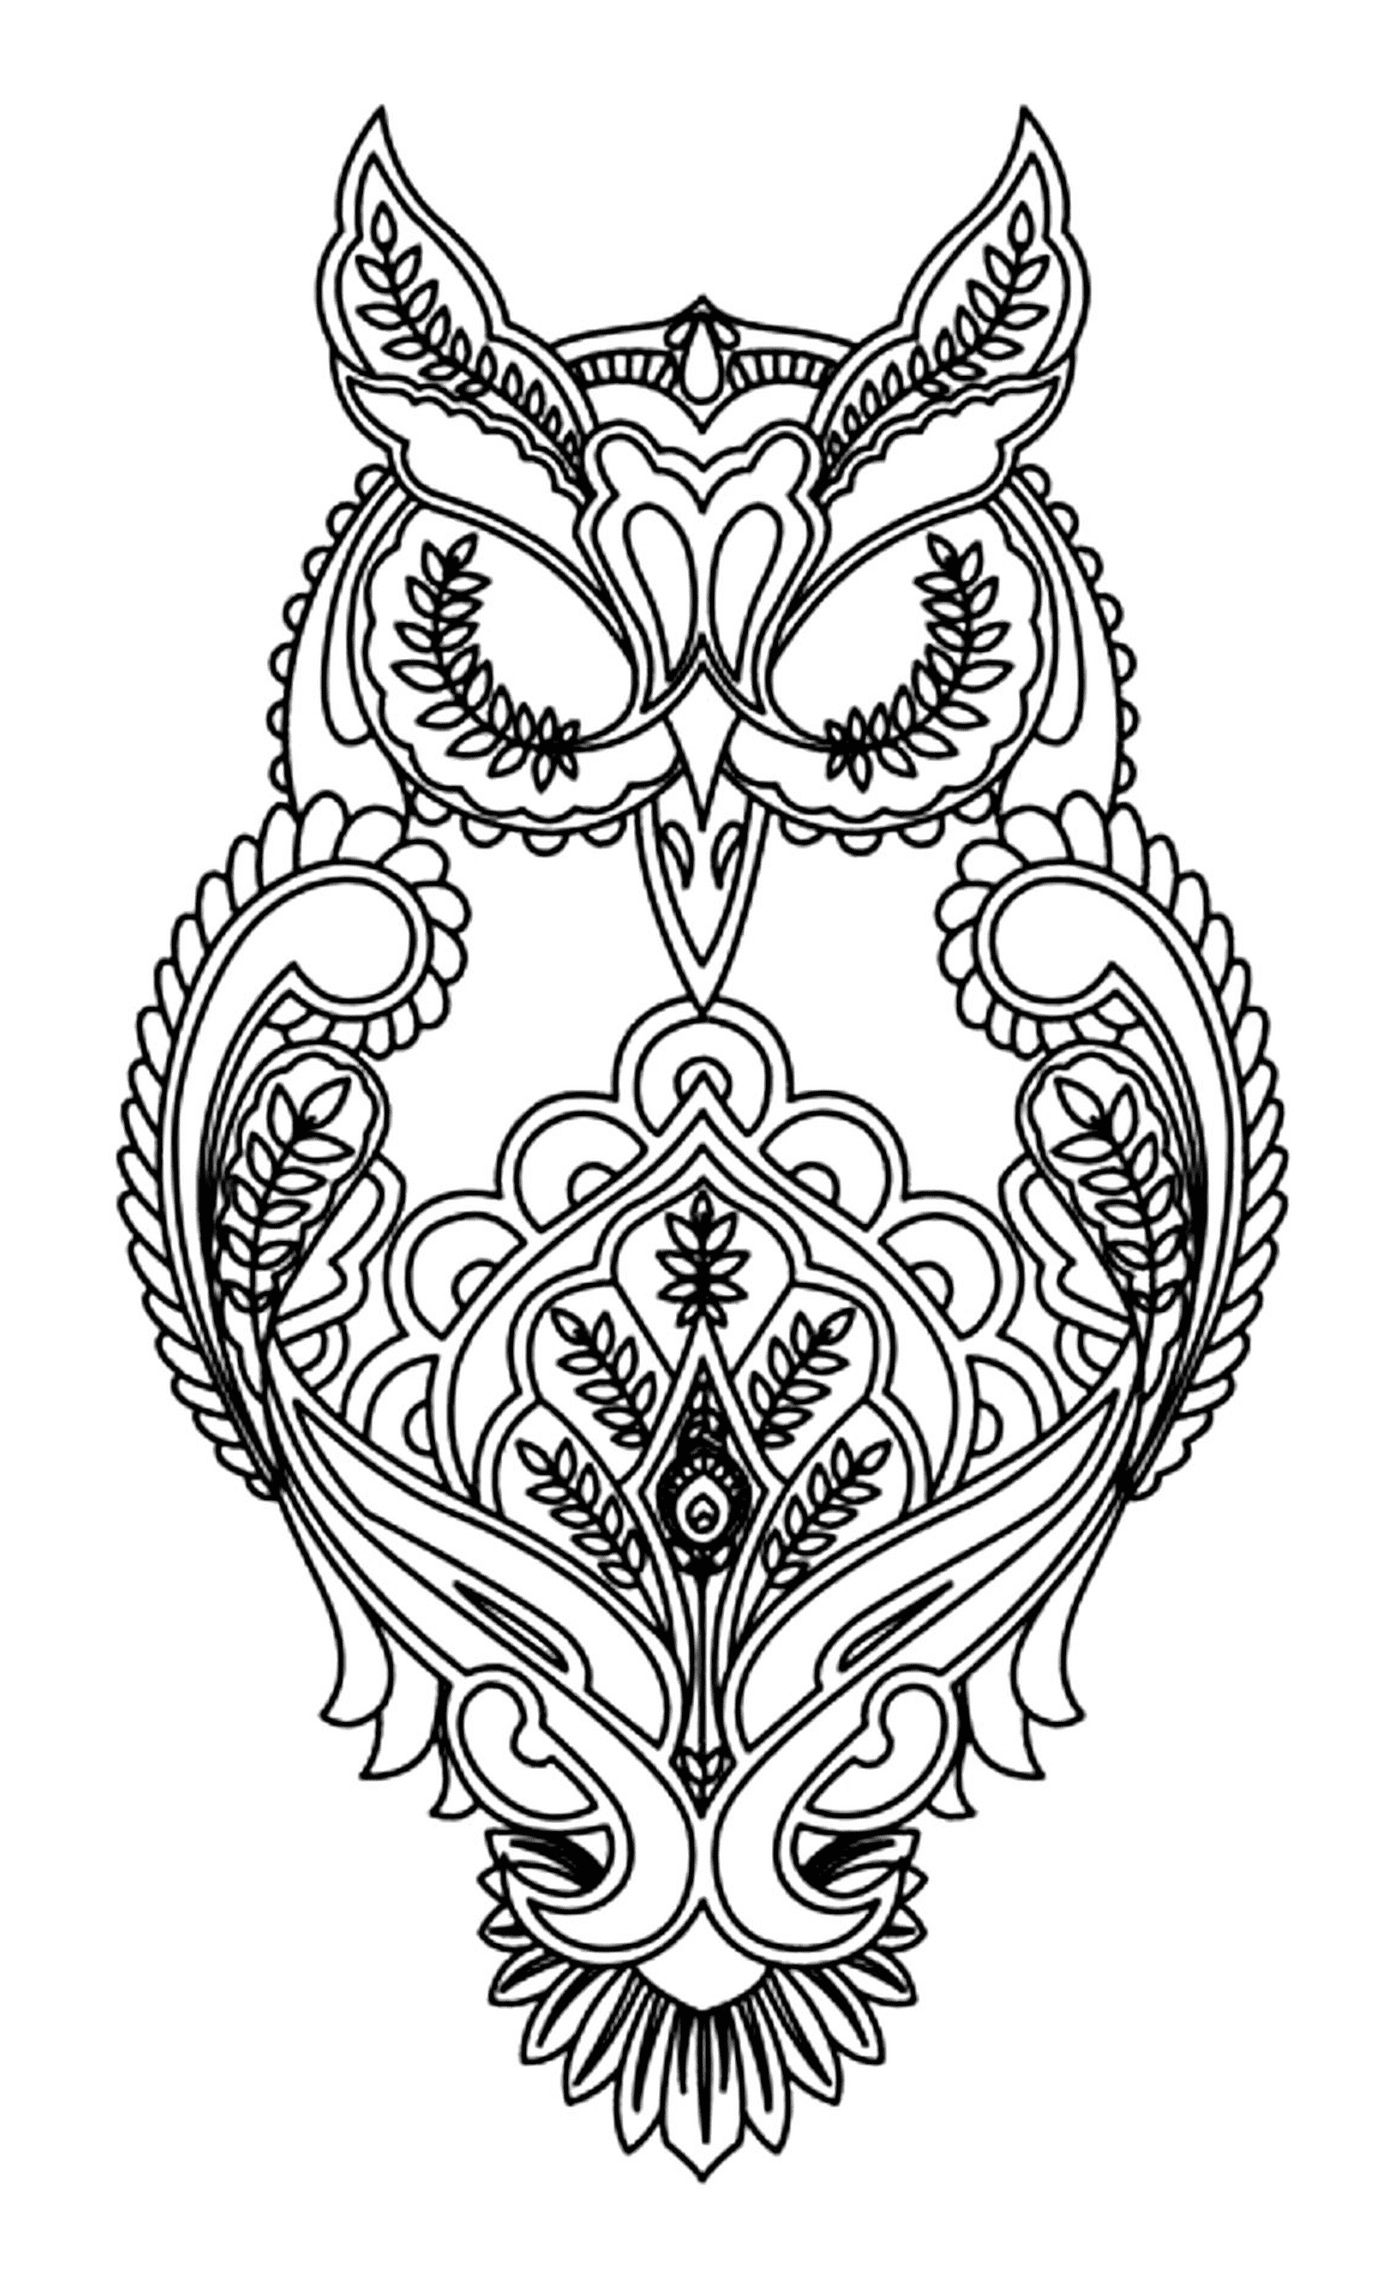  Owl with a difficult pattern 